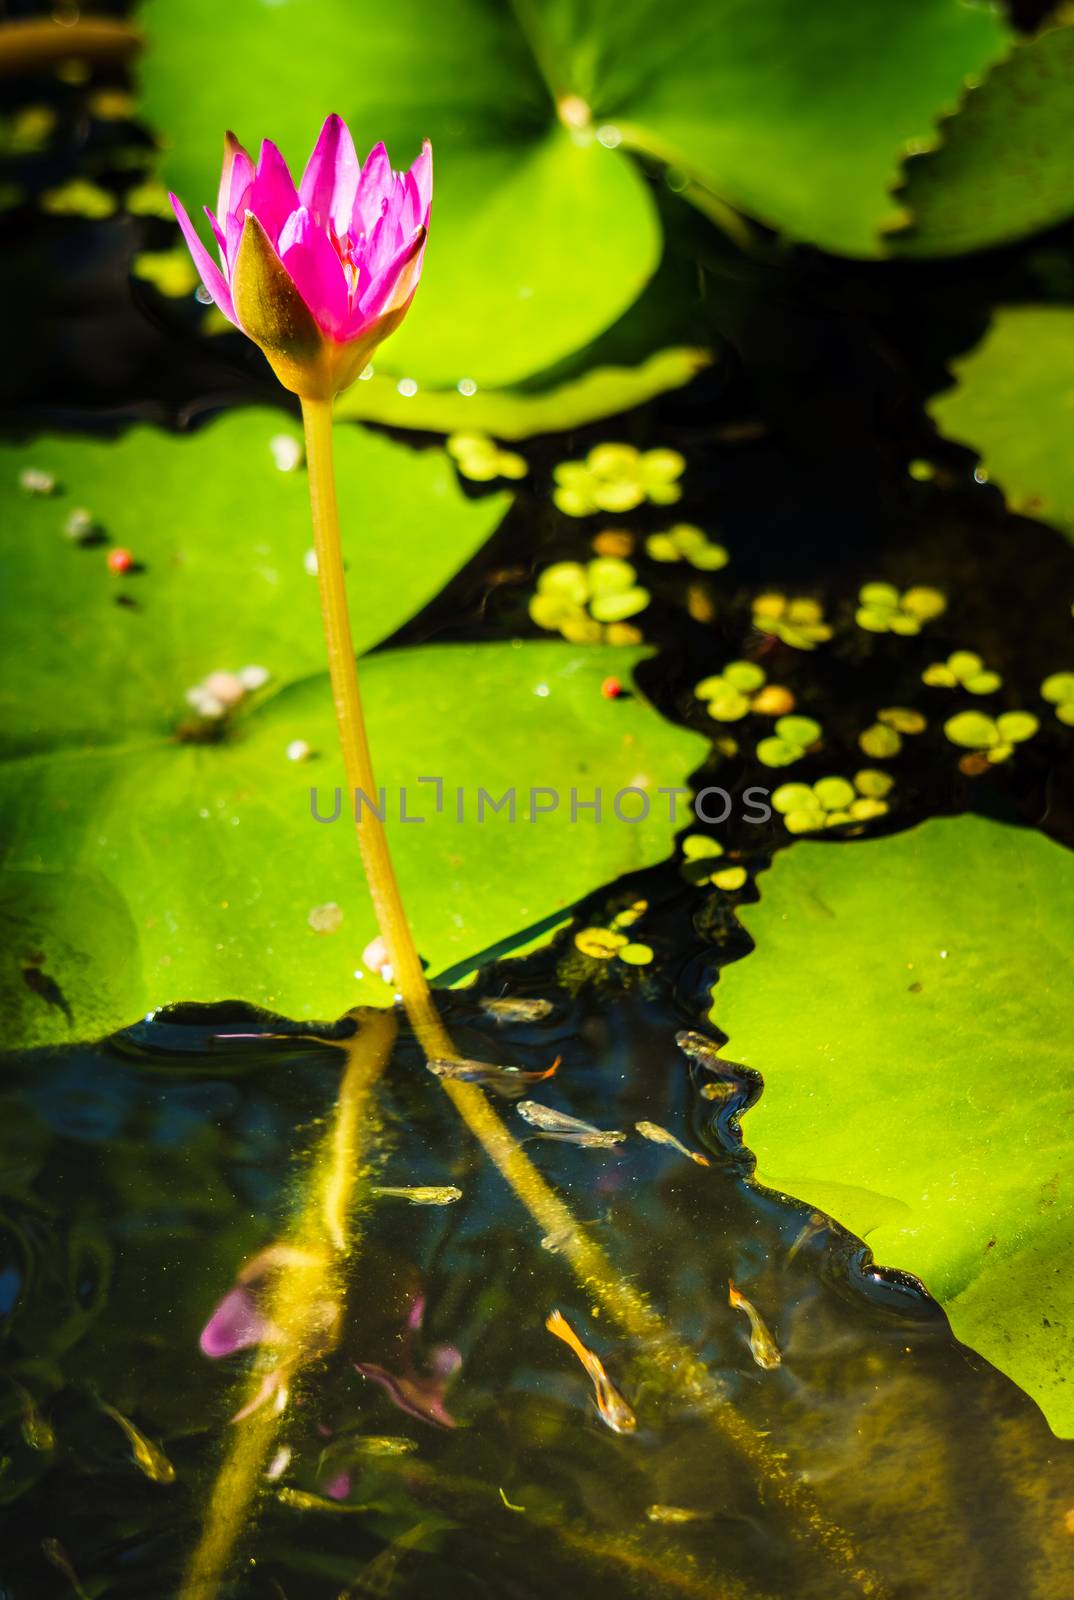 Close up of lilac lotus flower in pond with green leaves floating on the surface of the water. Multi-colored small, baby fish swimming near by